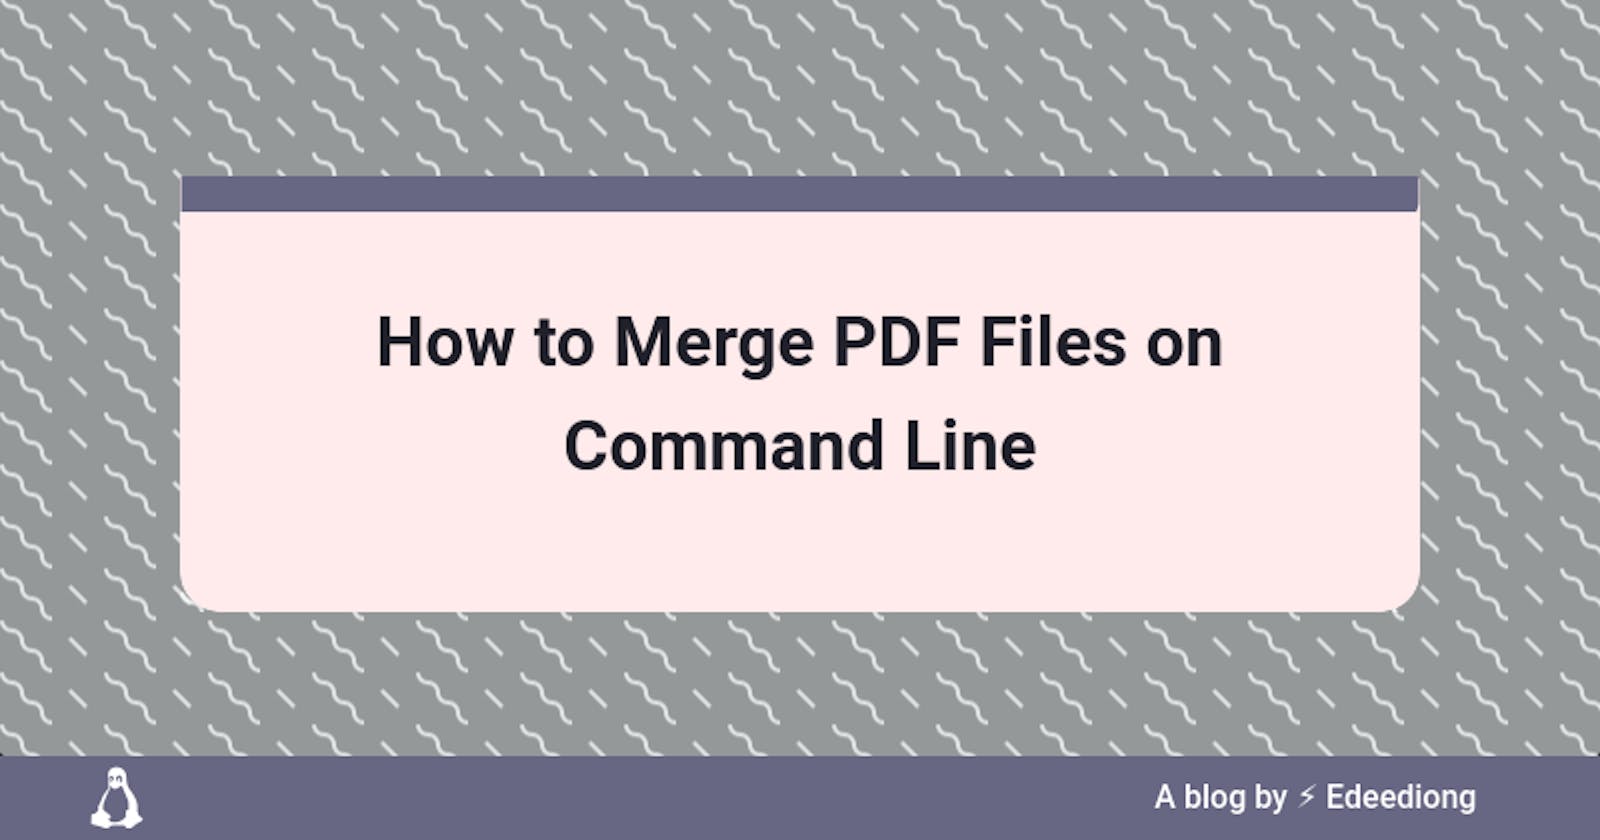 How to Merge PDF Files on Command Line